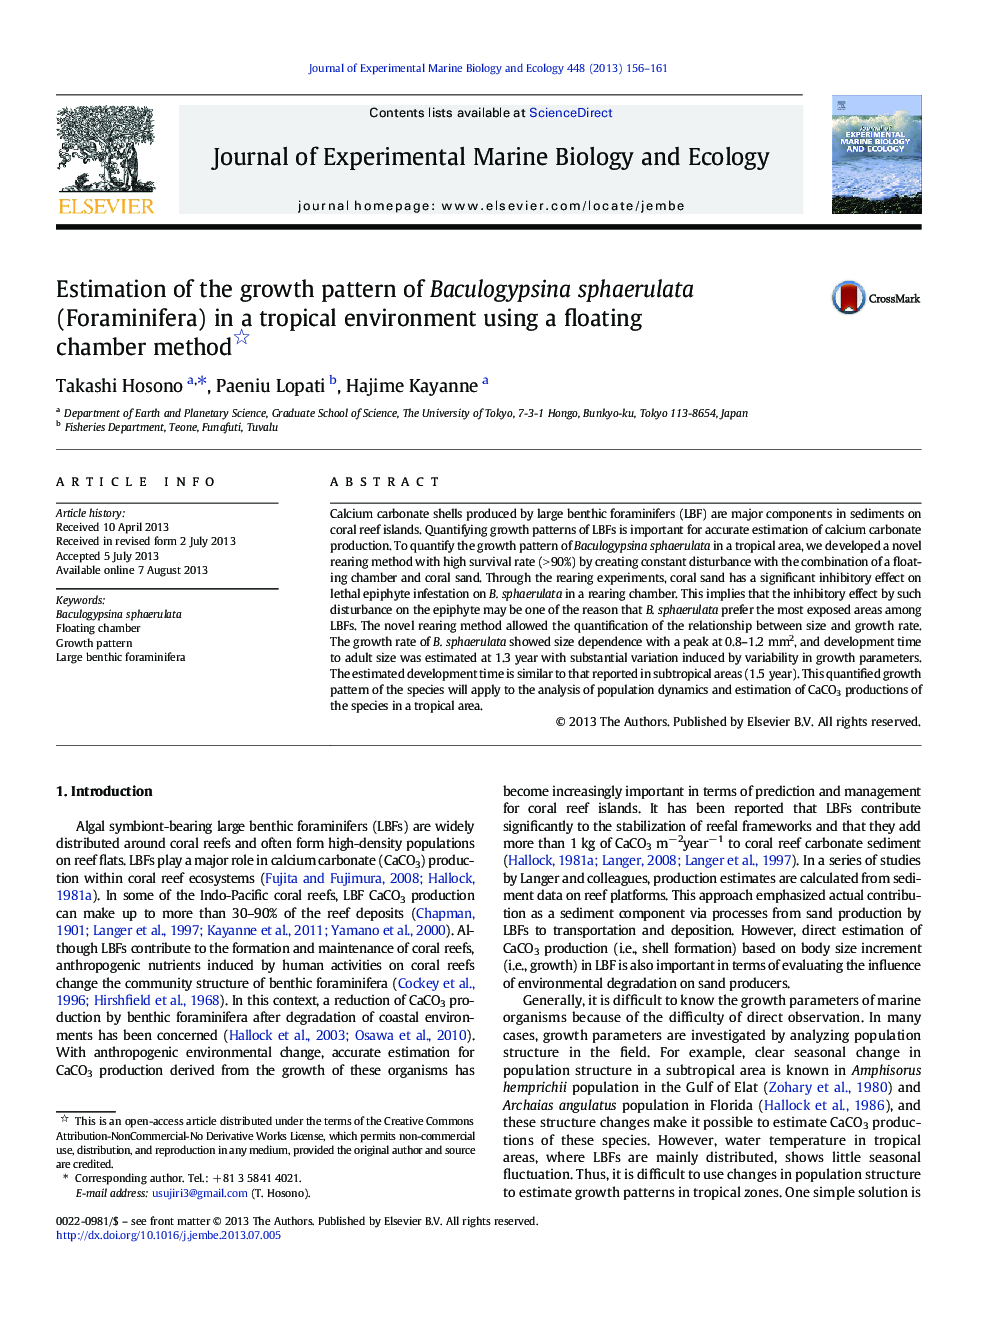 Estimation of the growth pattern of Baculogypsina sphaerulata (Foraminifera) in a tropical environment using a floating chamber method